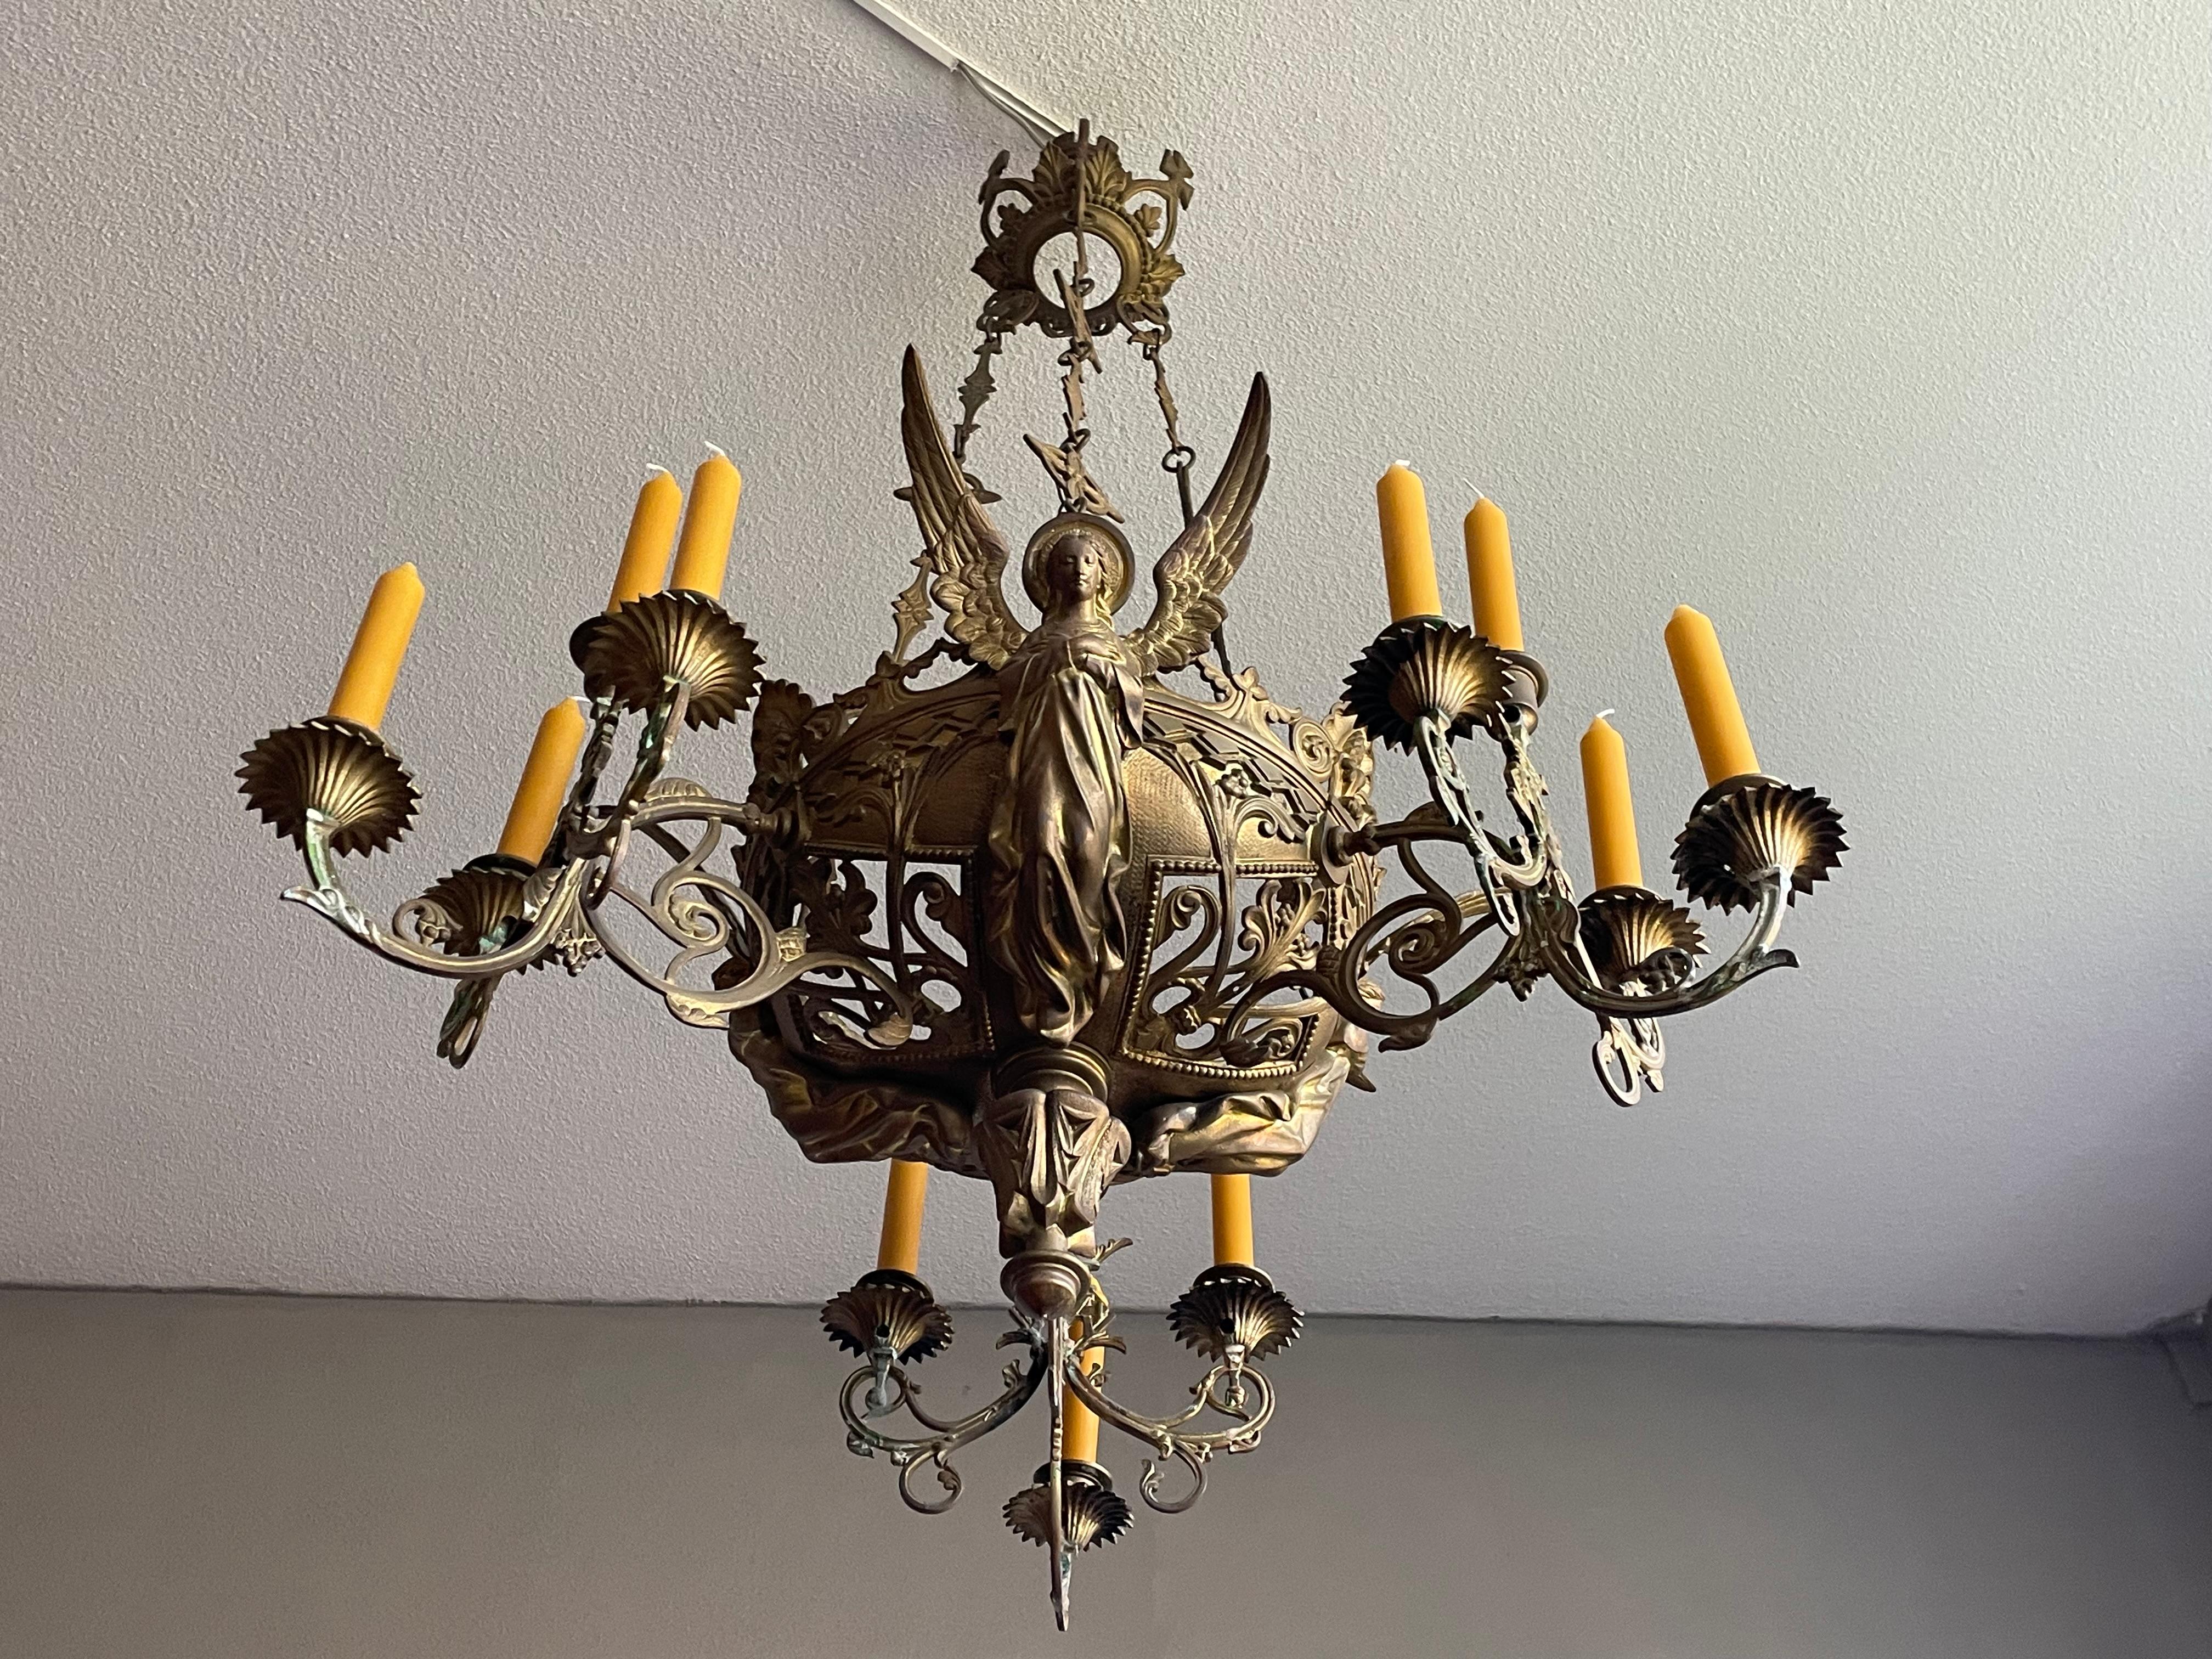 Bronze Gothic Revival Candle Chandelier w. Virgin Mary & Marian Cross Sculptures For Sale 3